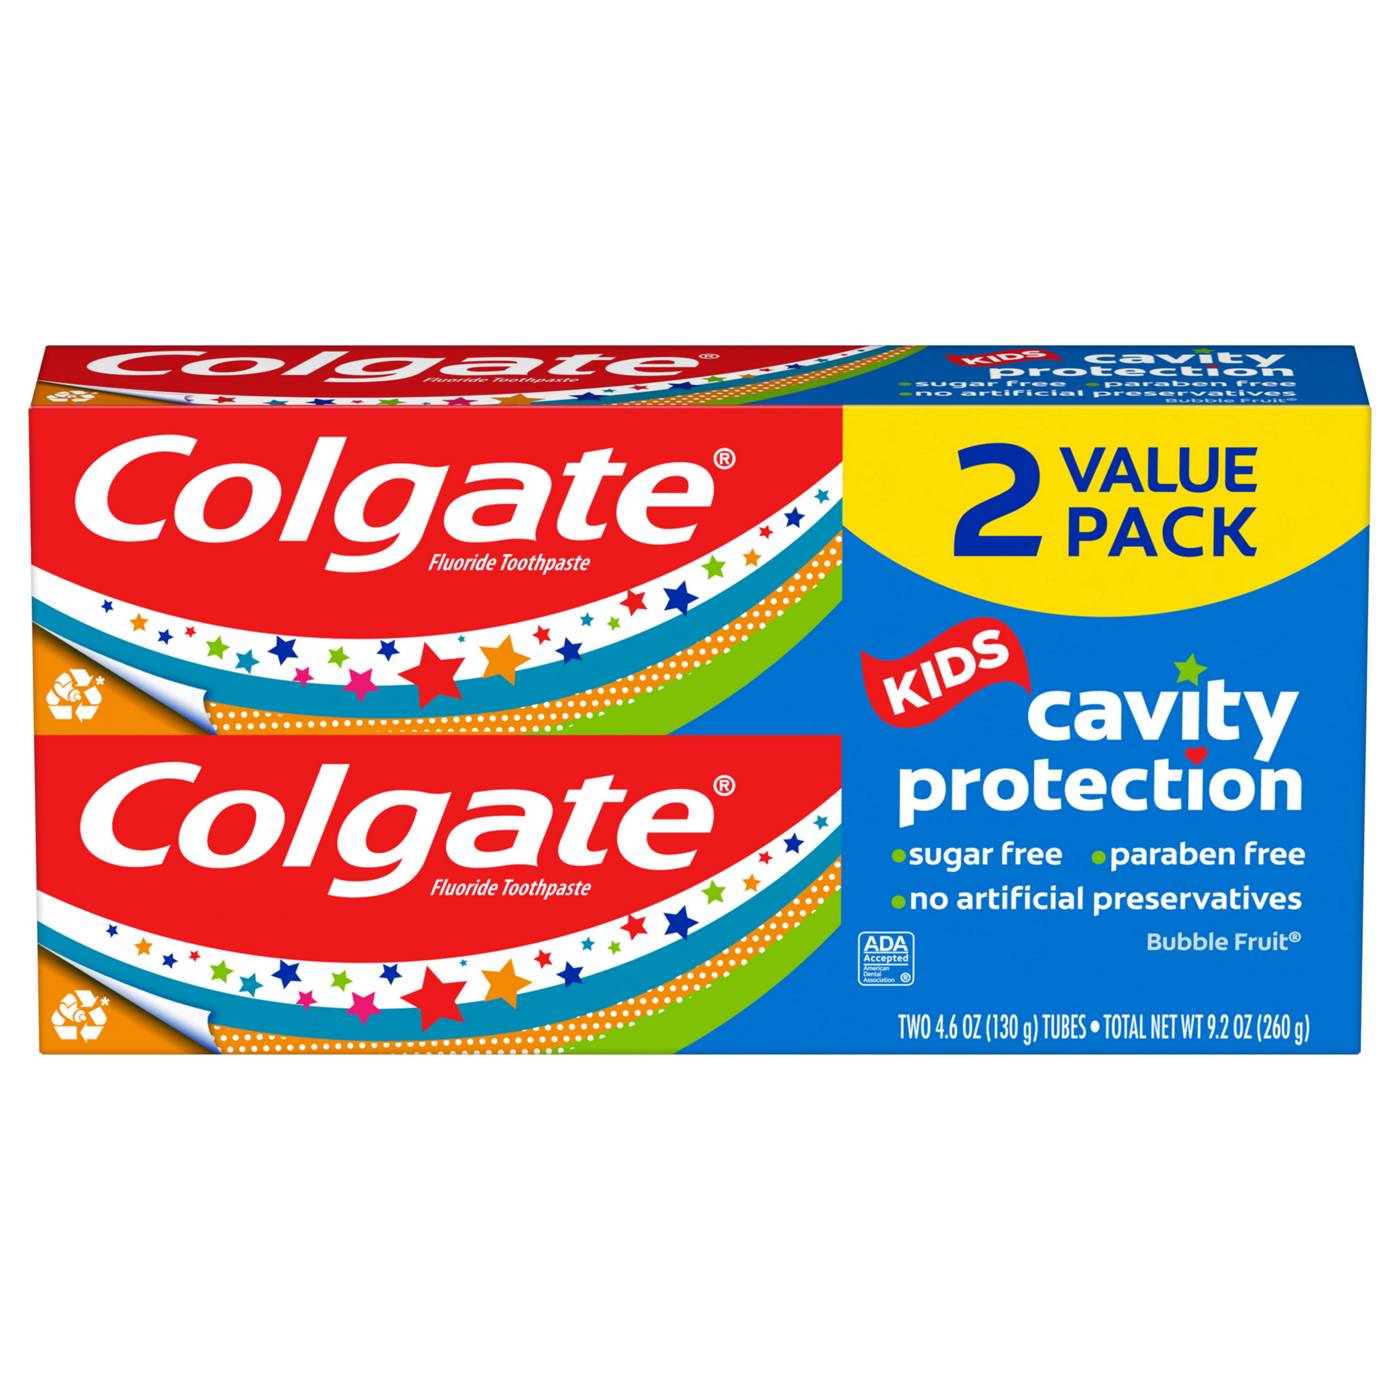 Colgate Kids Cavity Protection Toothpaste - Bubble Fruit, 2 Pk; image 1 of 8